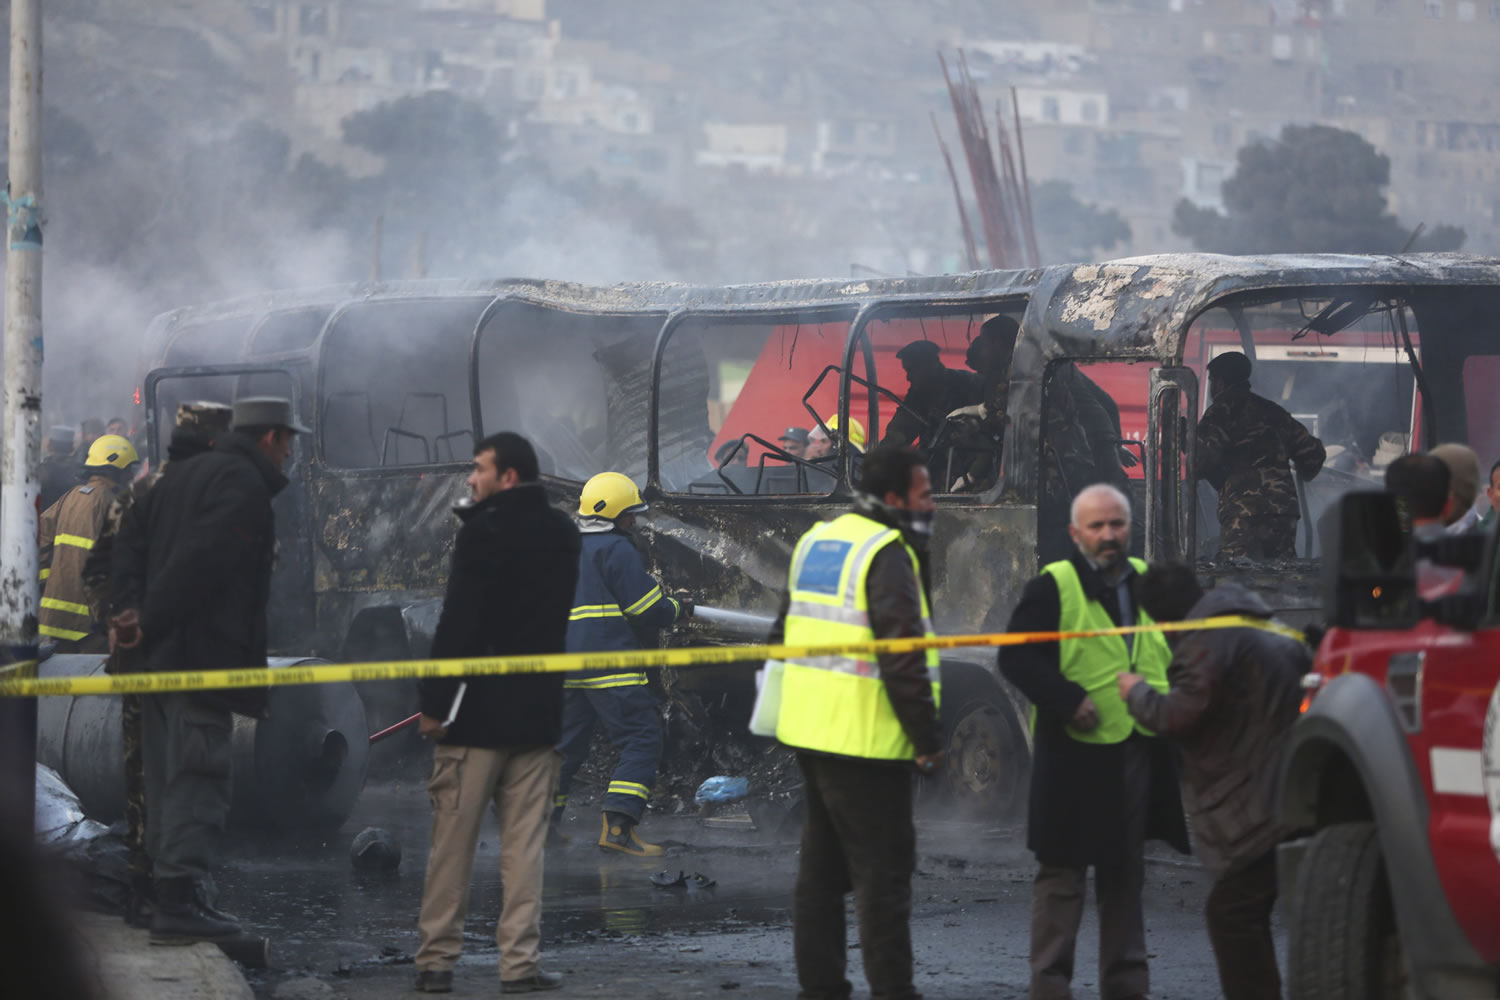 Afghan security guards inspect a damaged bus at the site of a suicide attack Saturday in Kabul, Afghanistan.